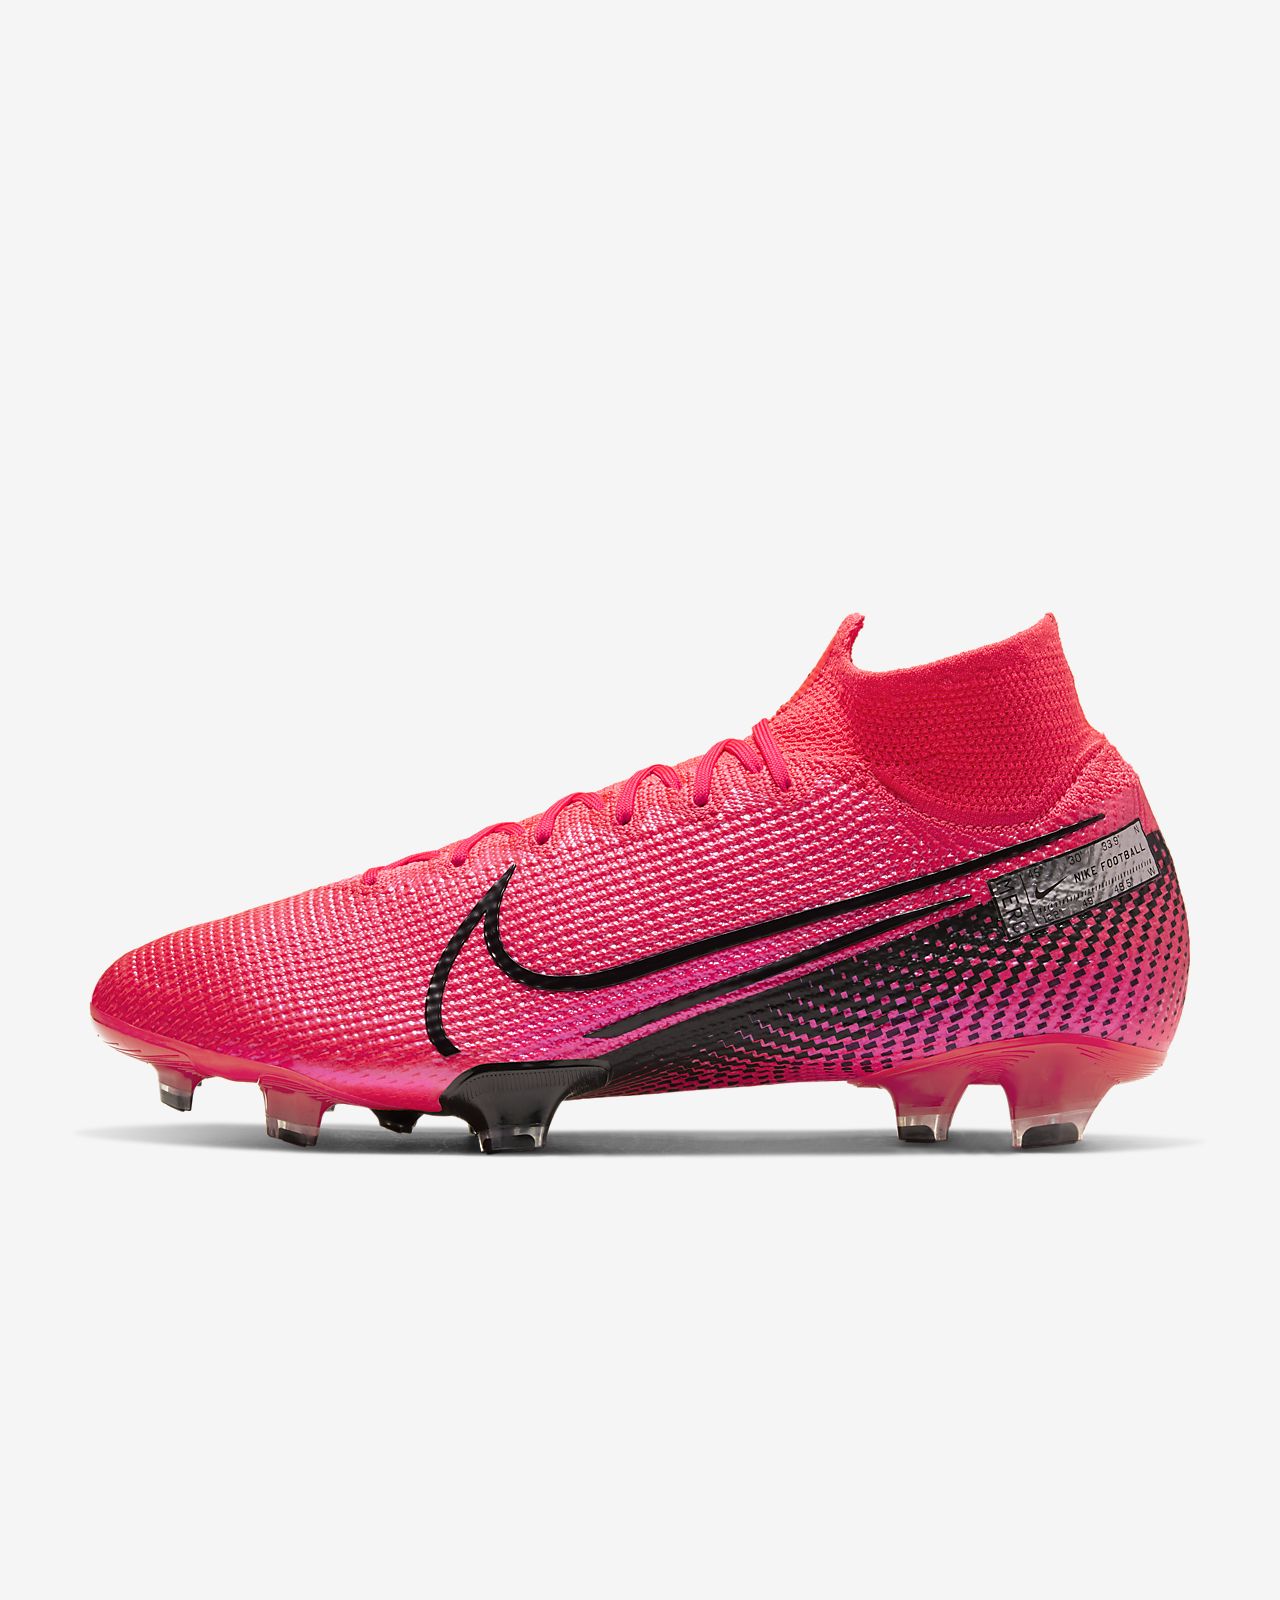 Nike Mercurial Superfly 6 Elite AC SG Pro LVL UP Cleats